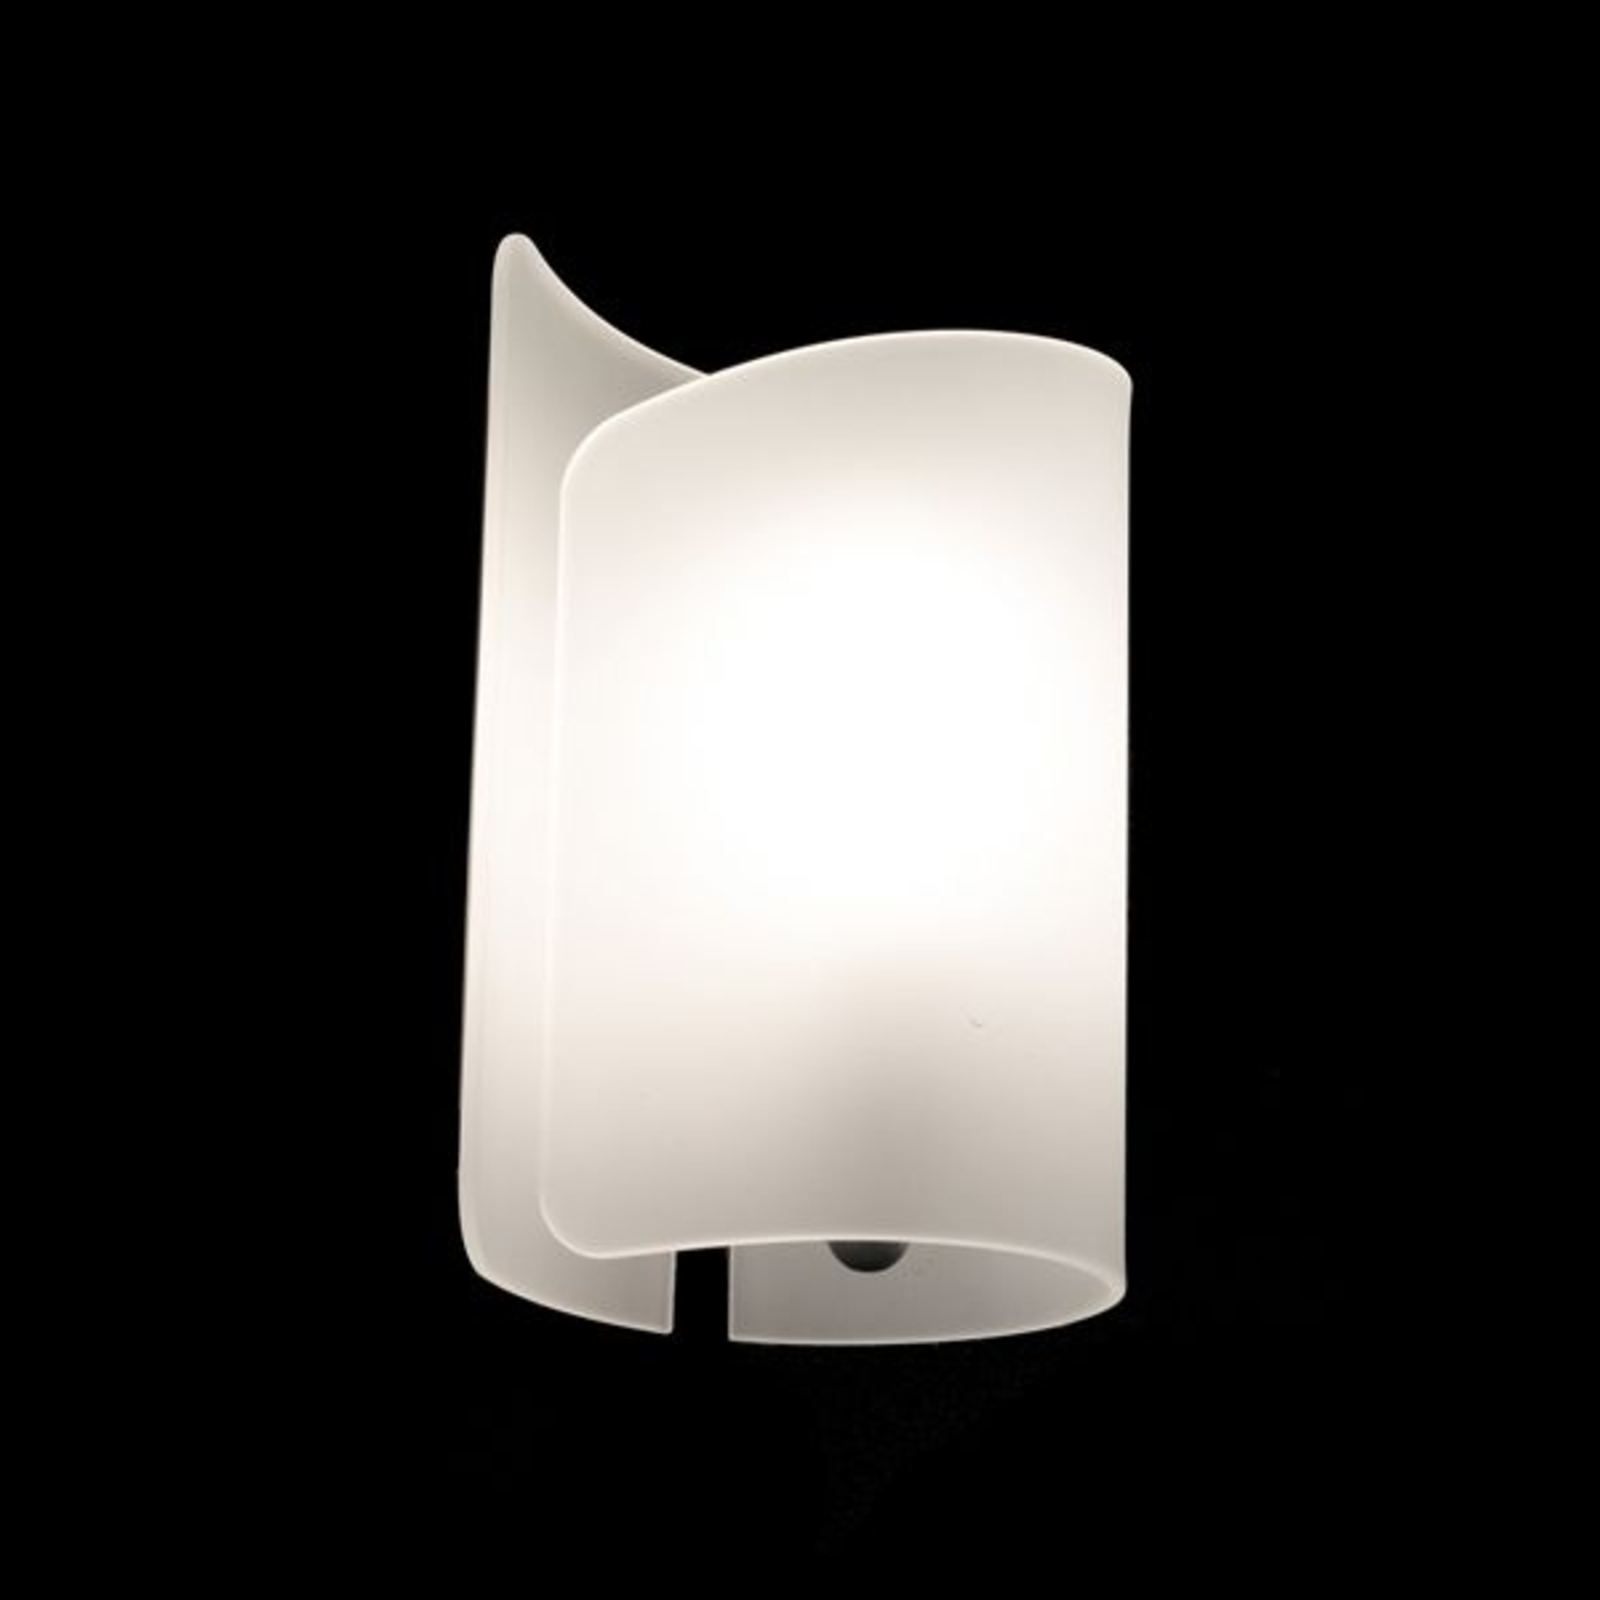 Papiro ceiling light with spacer, satinised